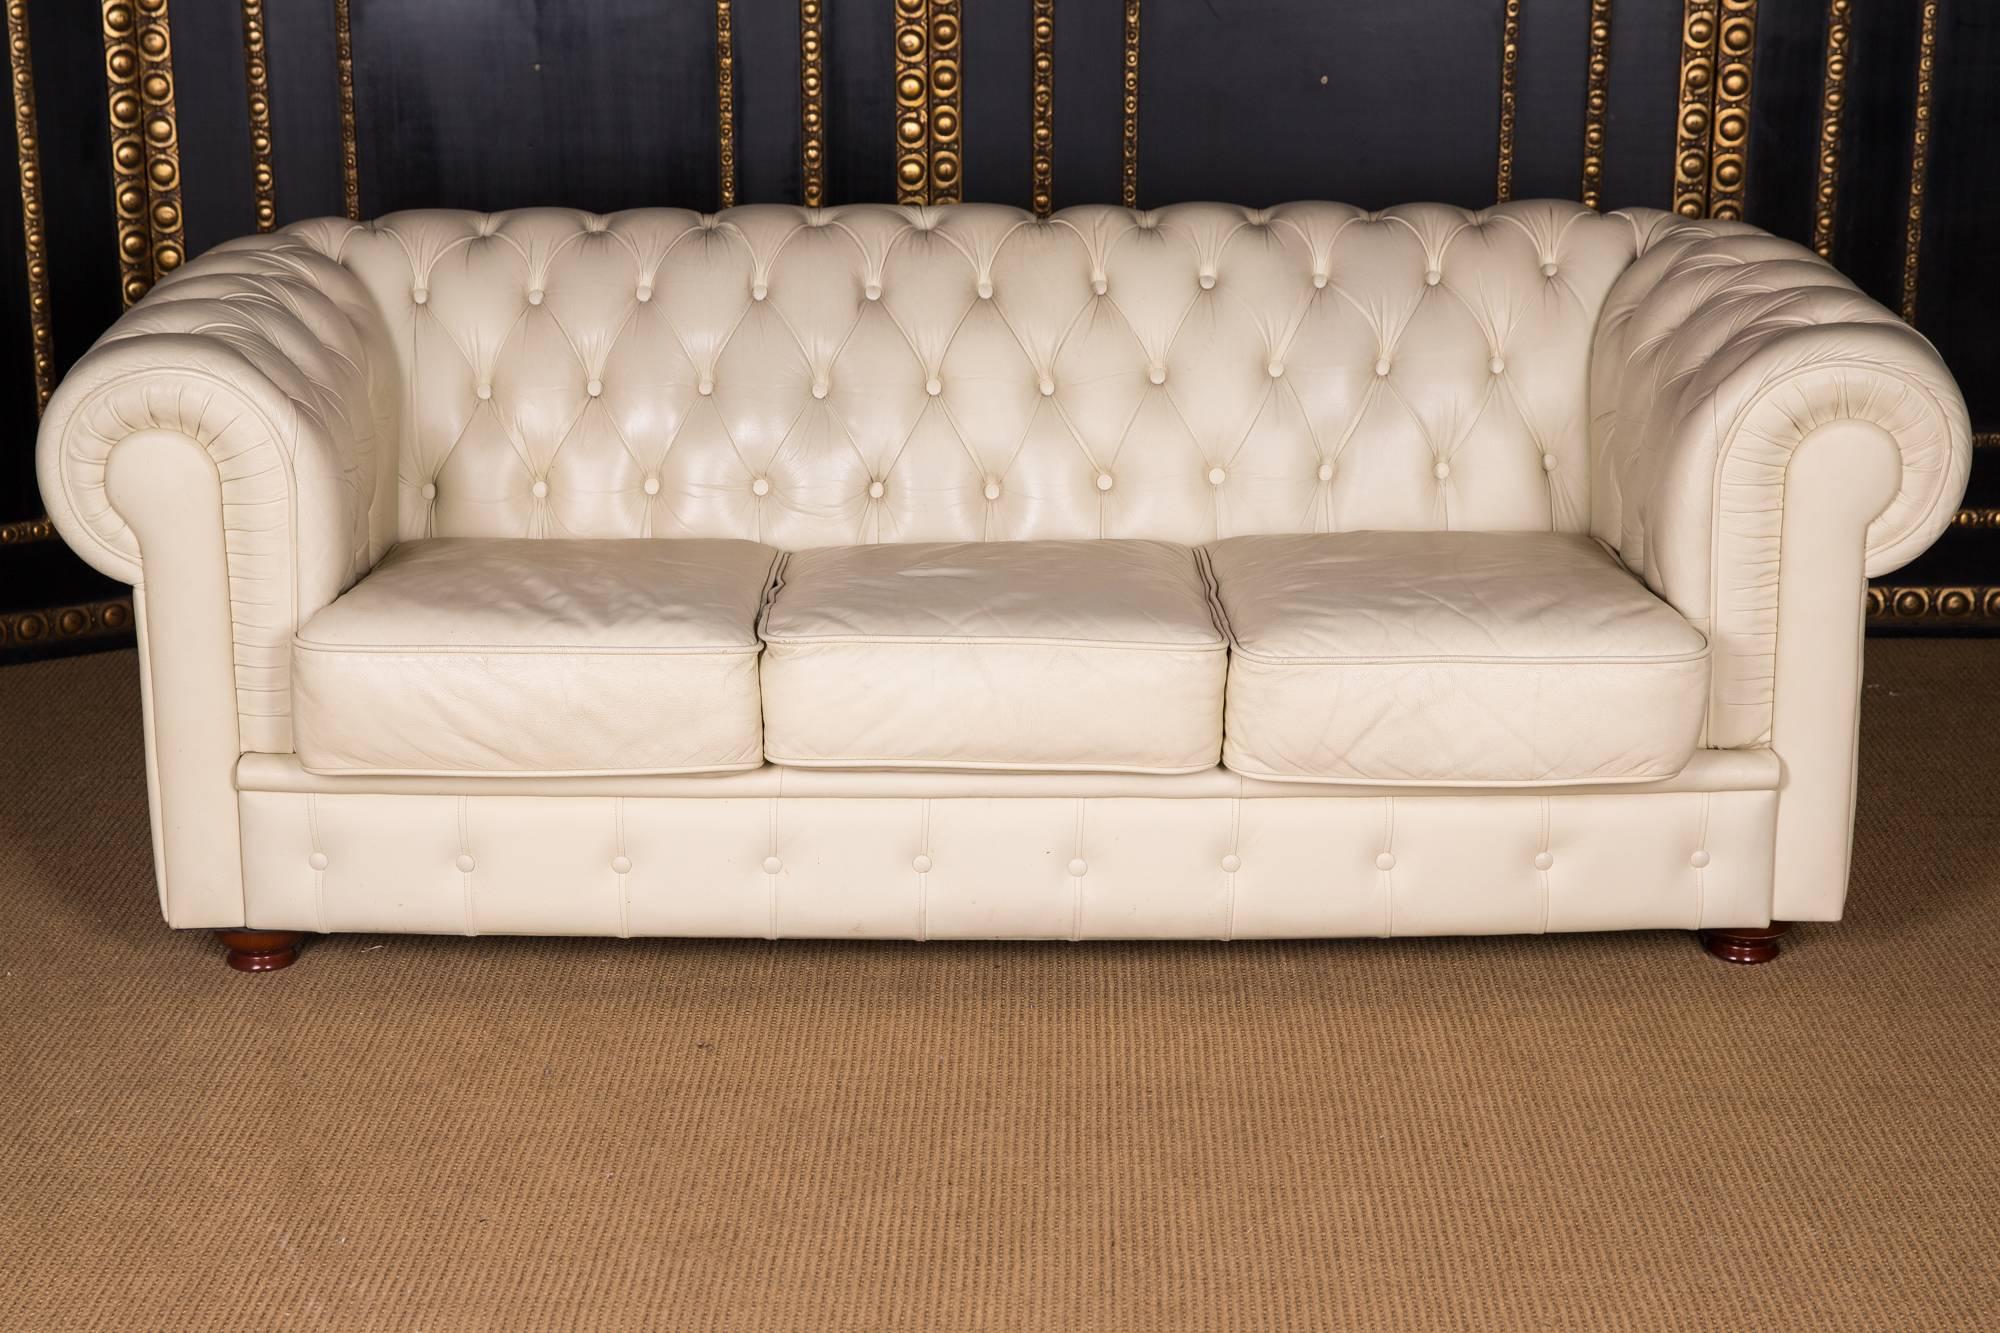 The Chesterfield sofa is covered with real, finest leather. The leather is of best quality, very easy to maintain and durable in use. At the same time, it is very gentle and smooth.

A rarity in this absolute top quality.

The color is simply